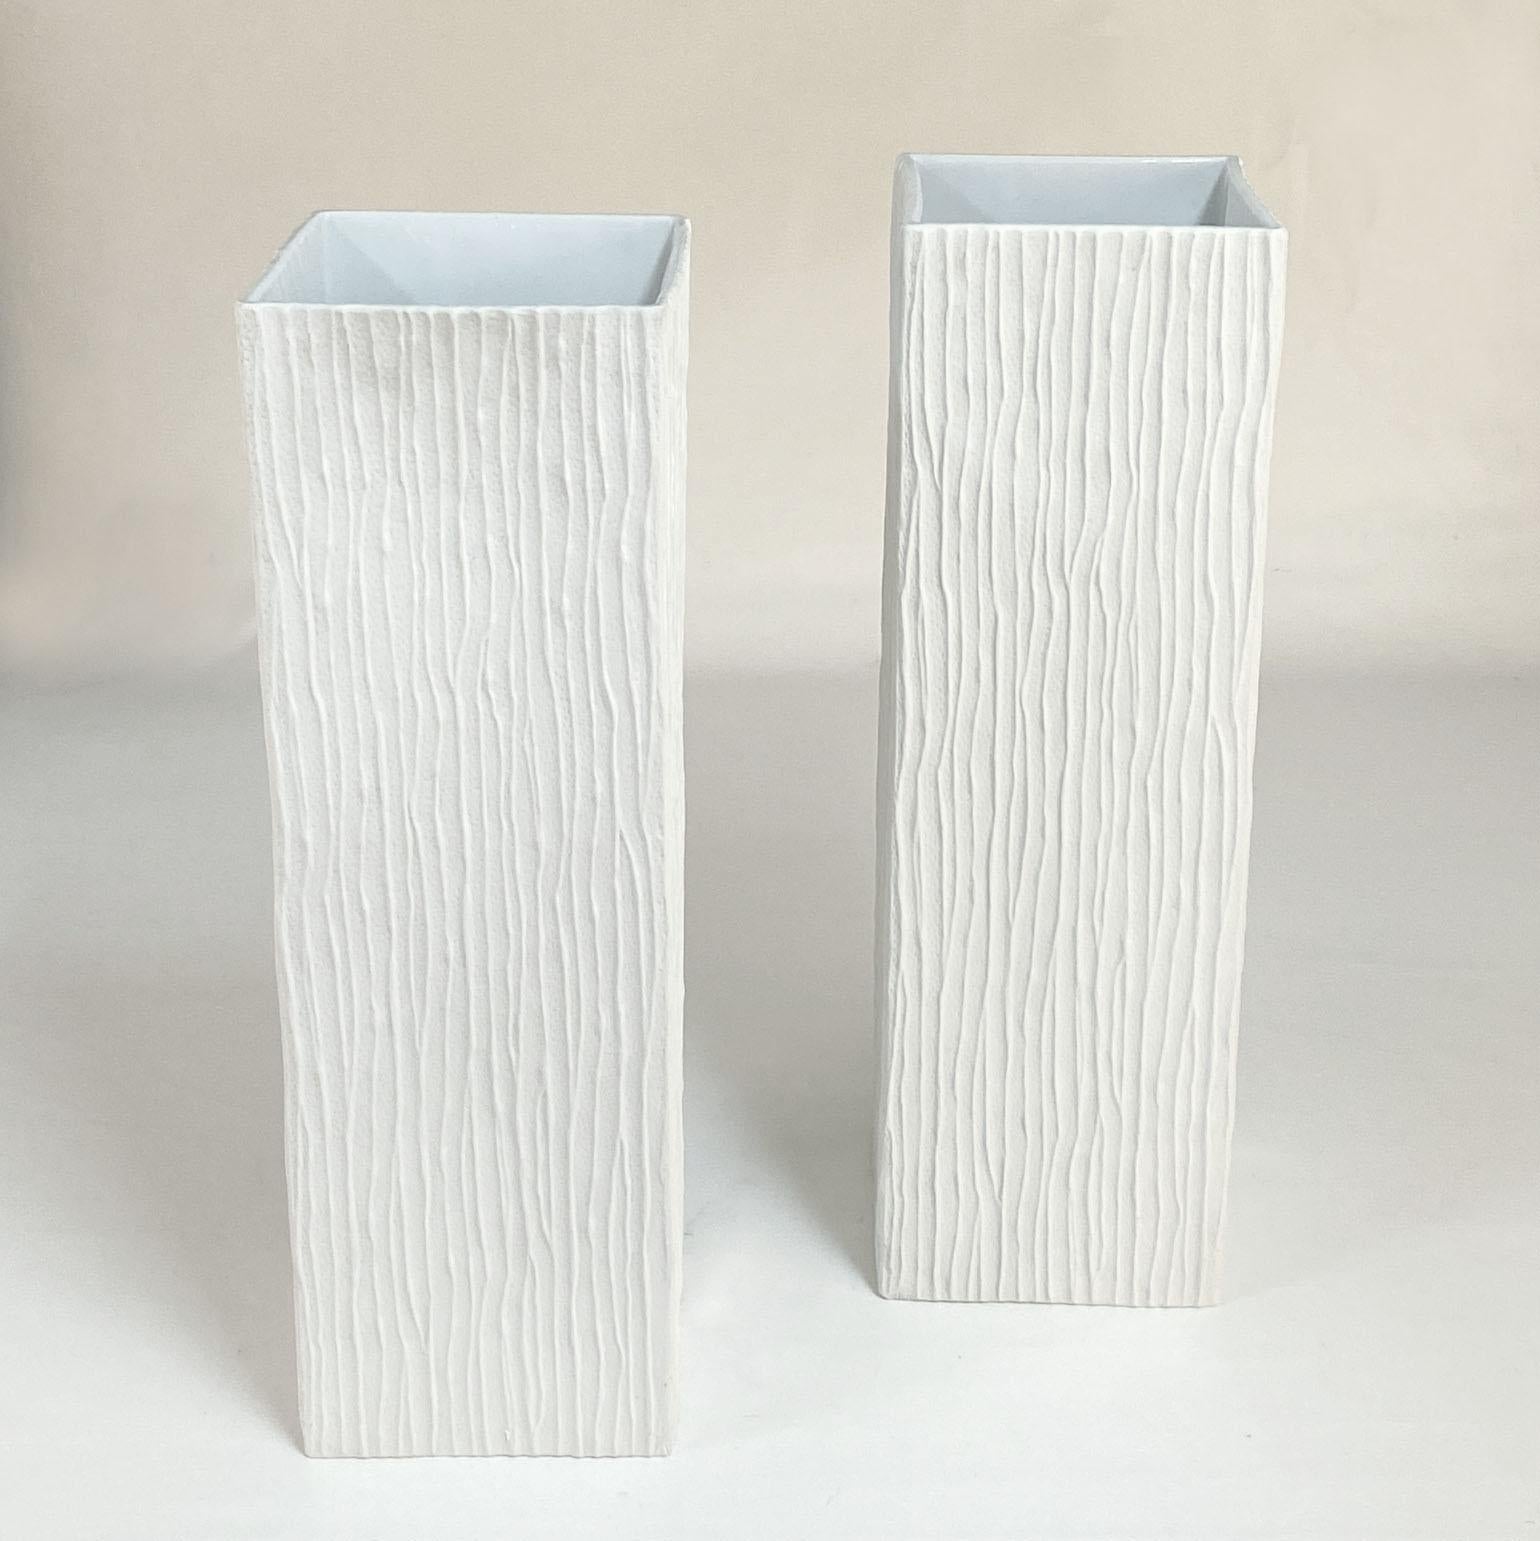 Cast Pair of Large White Square Relief Vases by Hutschenreuther For Sale